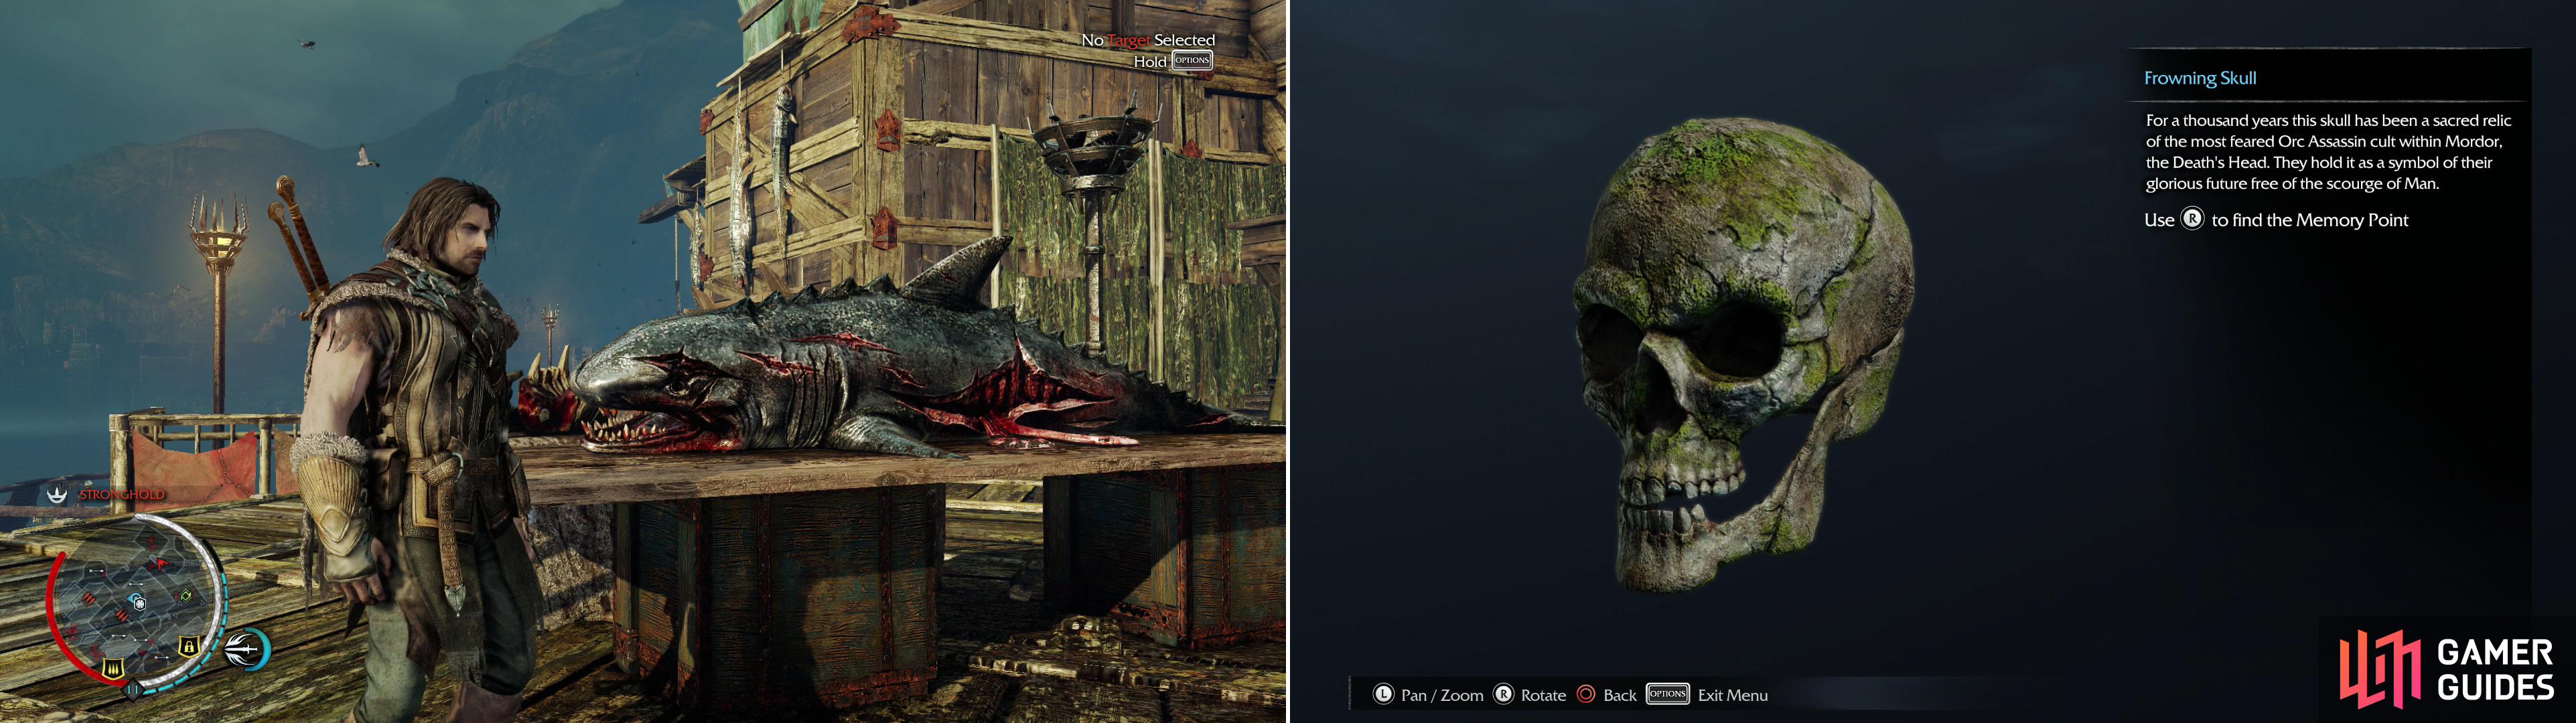 It should be no surprise that monsters lurk in the waters off Mordor (left). Pick up the Frowning Skull (right) a rather macabre Artifact.